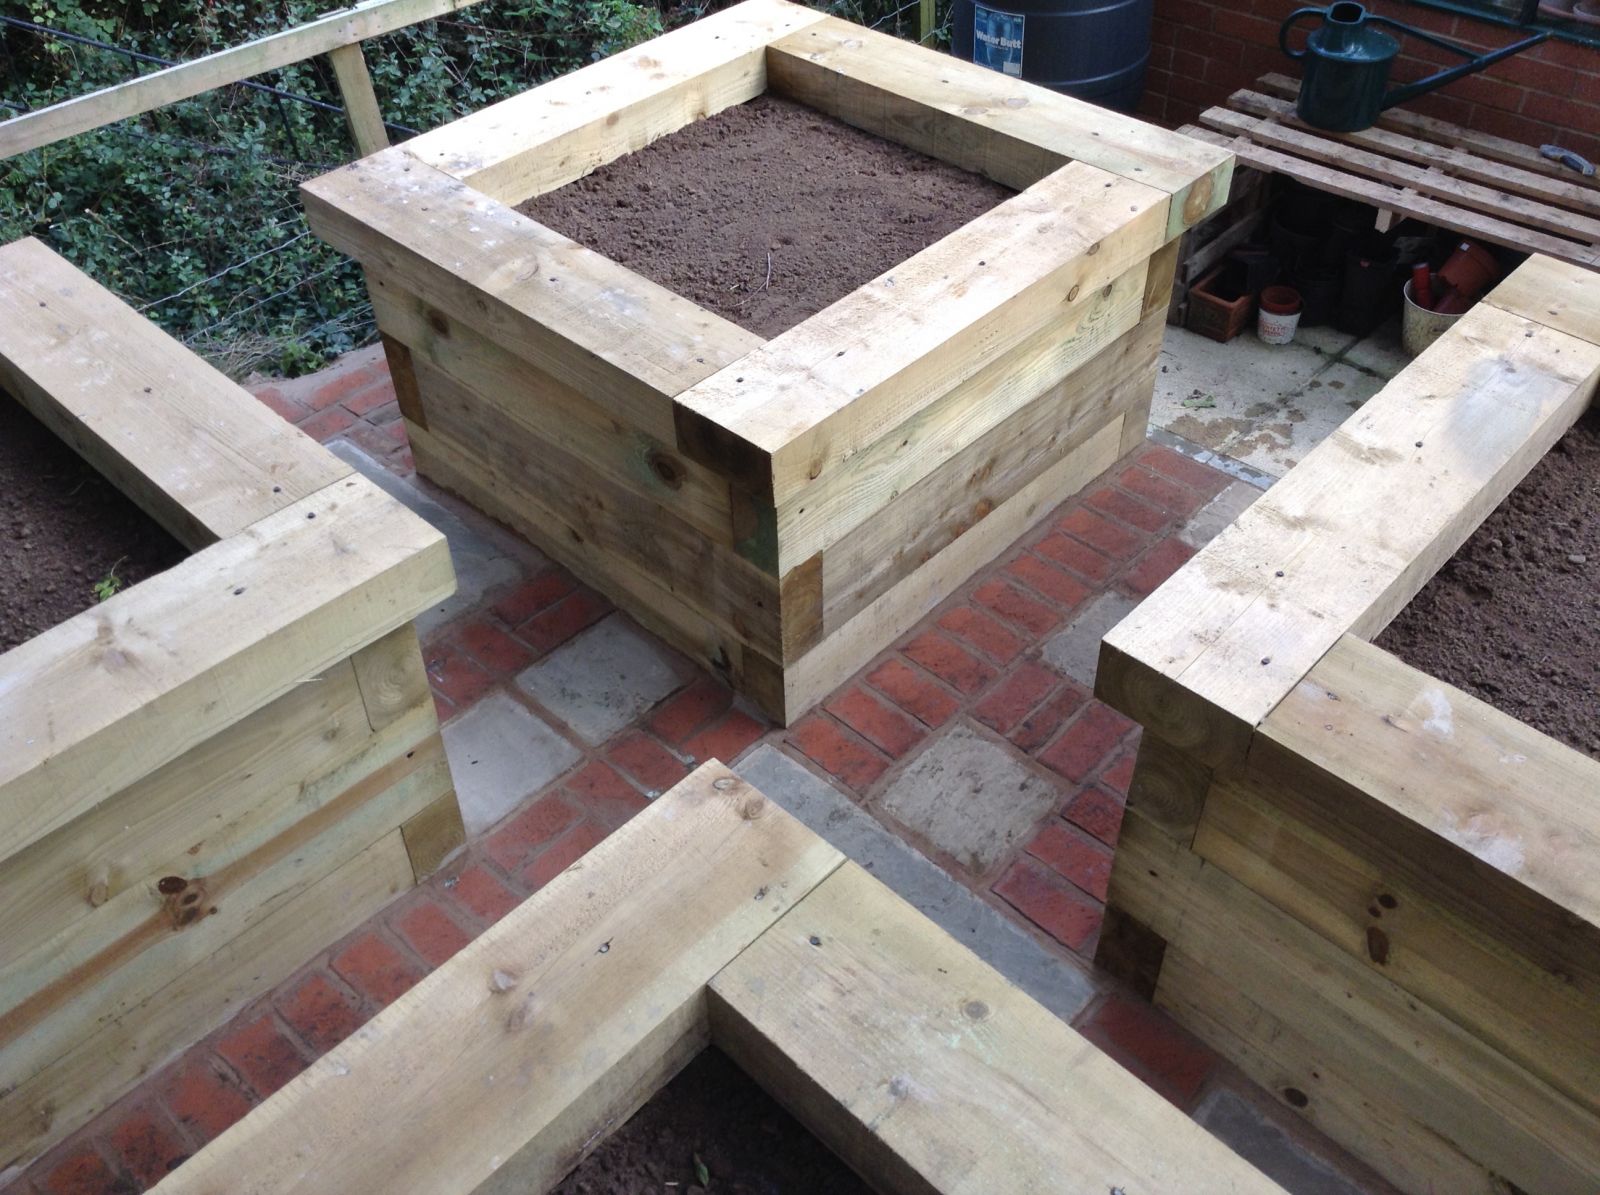 Constructing a pattern of raised beds with new railway sleepers. Railwaysleepers.com